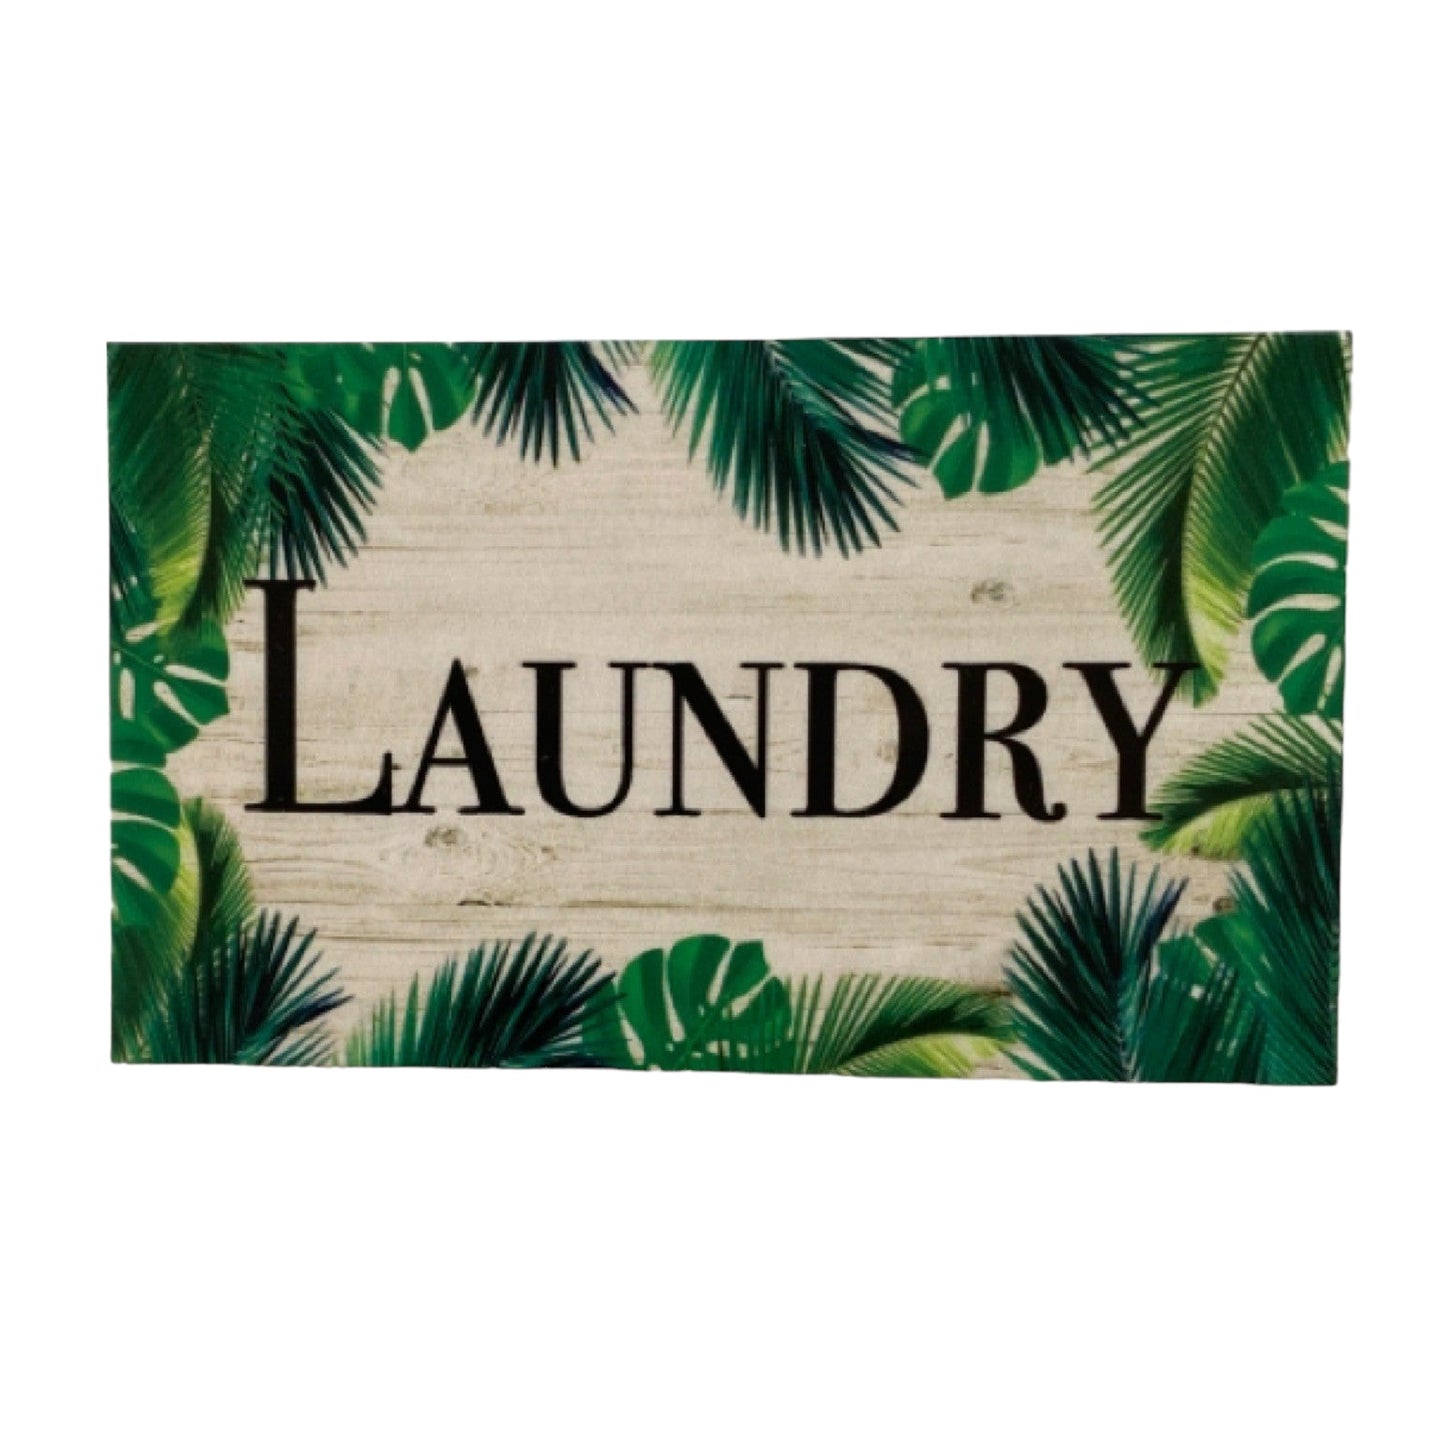 Tropical Door Room Sign Toilet Laundry Bathroom Beach House - The Renmy Store Homewares & Gifts 